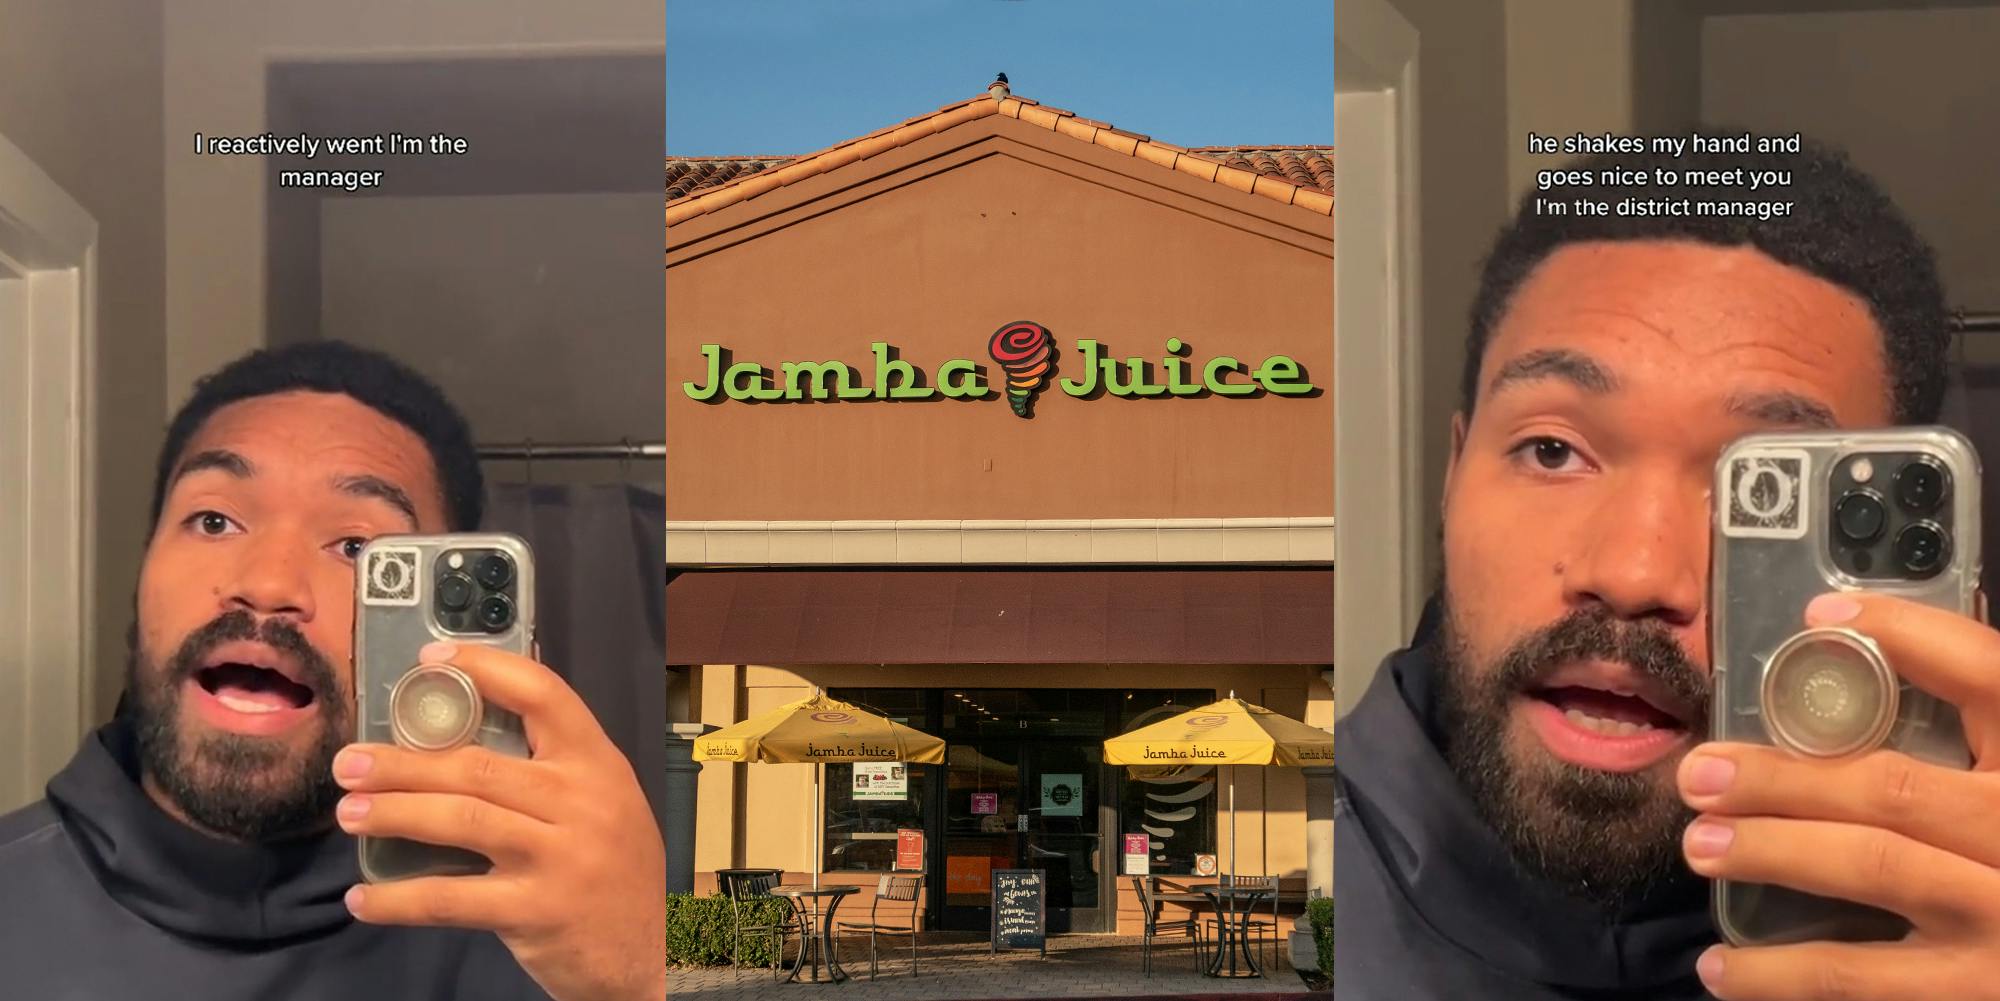 man speaking in mirror with caption "I reactively went I'm the manager" (l) Jamba Juice sign on building (c) man speaking in mirror with caption "he shakes my hand and goes nice to meet you I'm the district manager" (r)